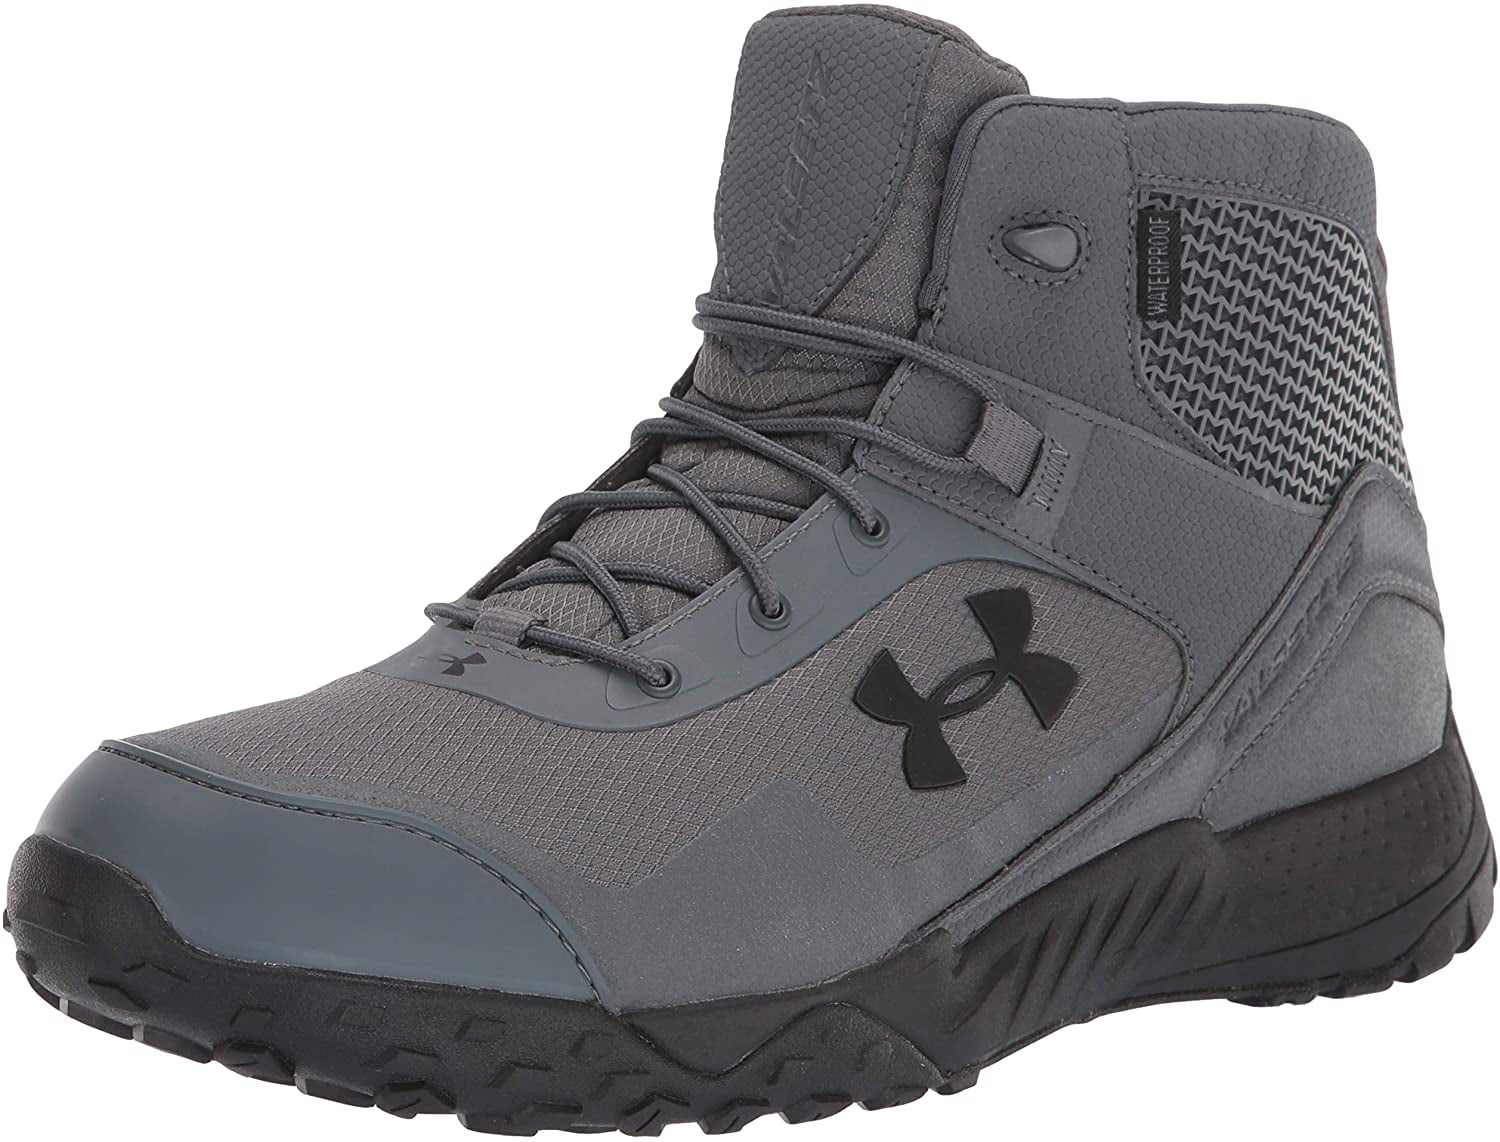 Under Armour Valsetz RTS 1.5 Mens' Mid Tactical Athletic Boot Black